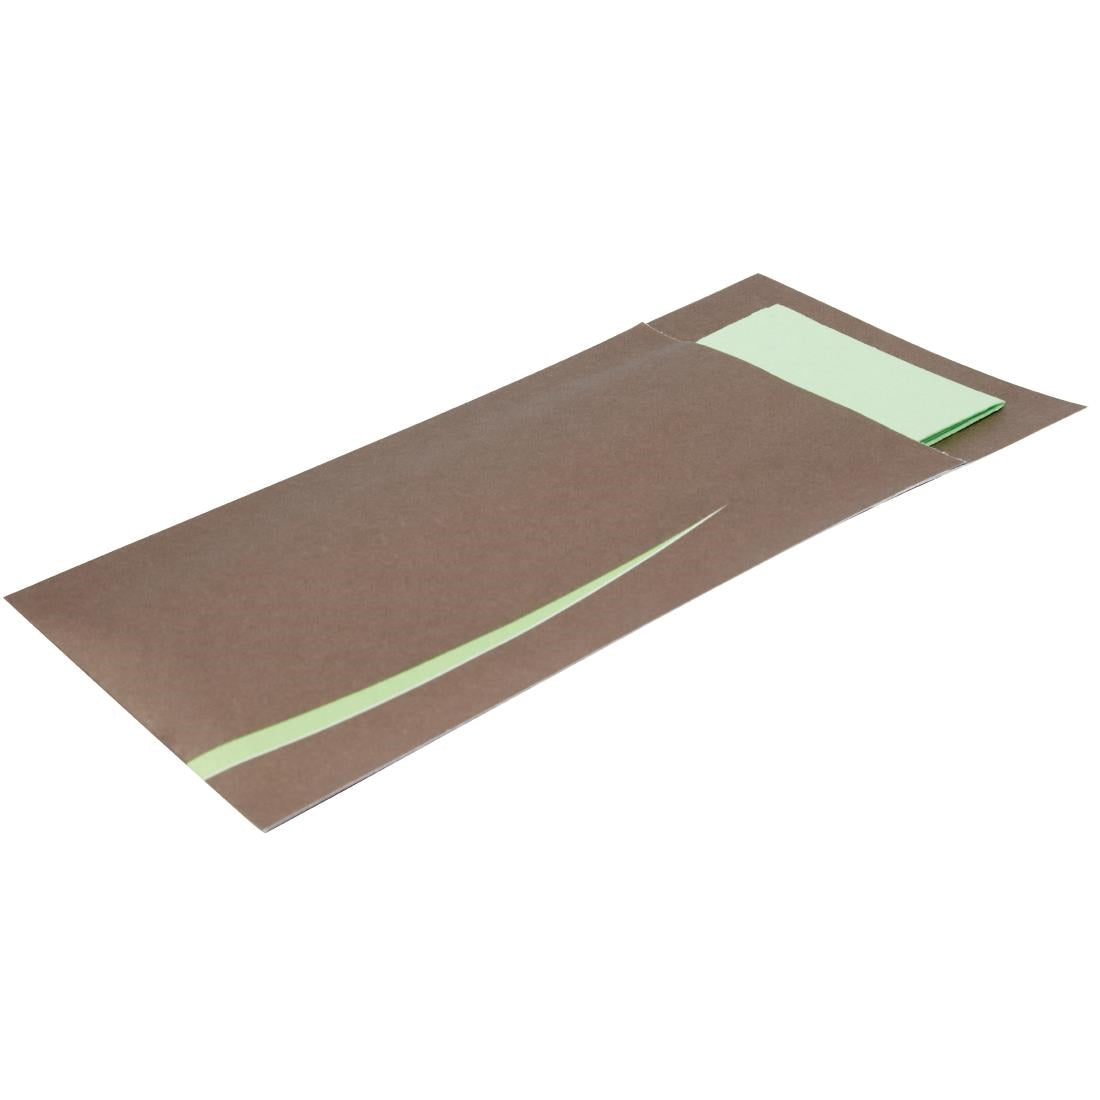 CK237 Europochette Bari Brown Cutlery Pouch with Napkin (Pack of 100) JD Catering Equipment Solutions Ltd